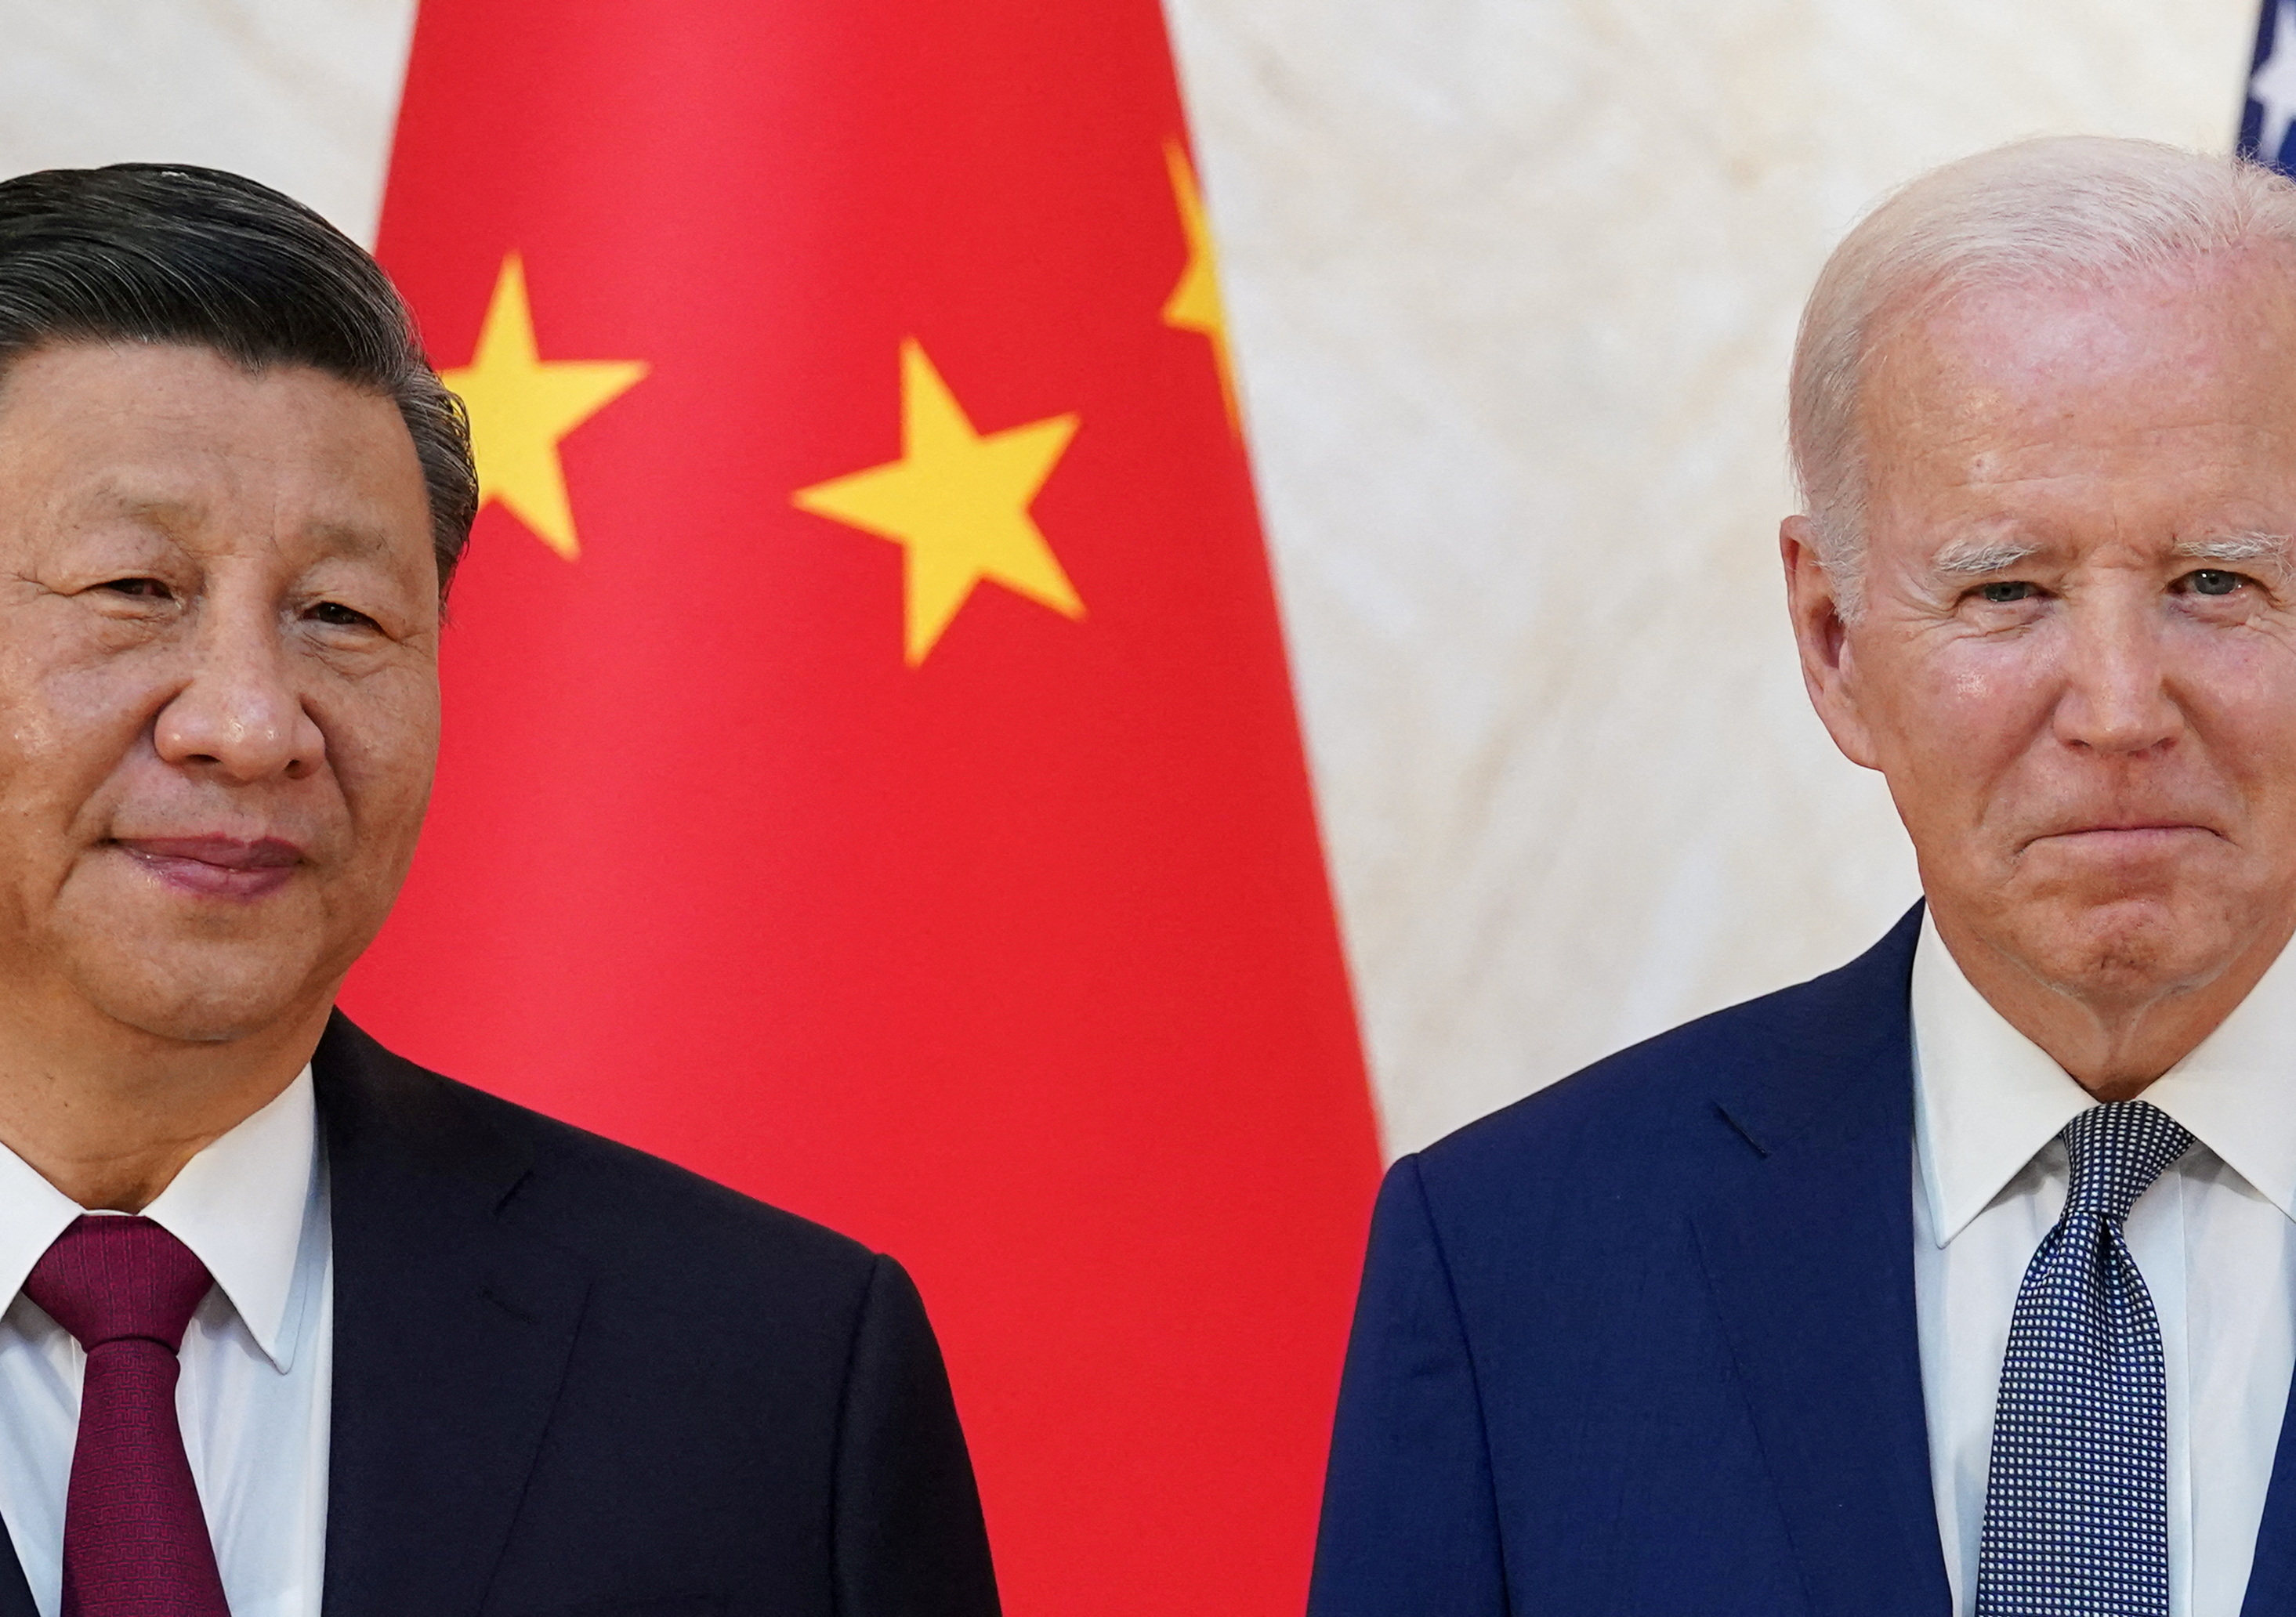 U.S. President Joe Biden meets with Chinese President Xi Jinping on the sidelines of the G20 leaders’ summit in Bali, Indonesia, November 14, 2022. Photo: Reuters